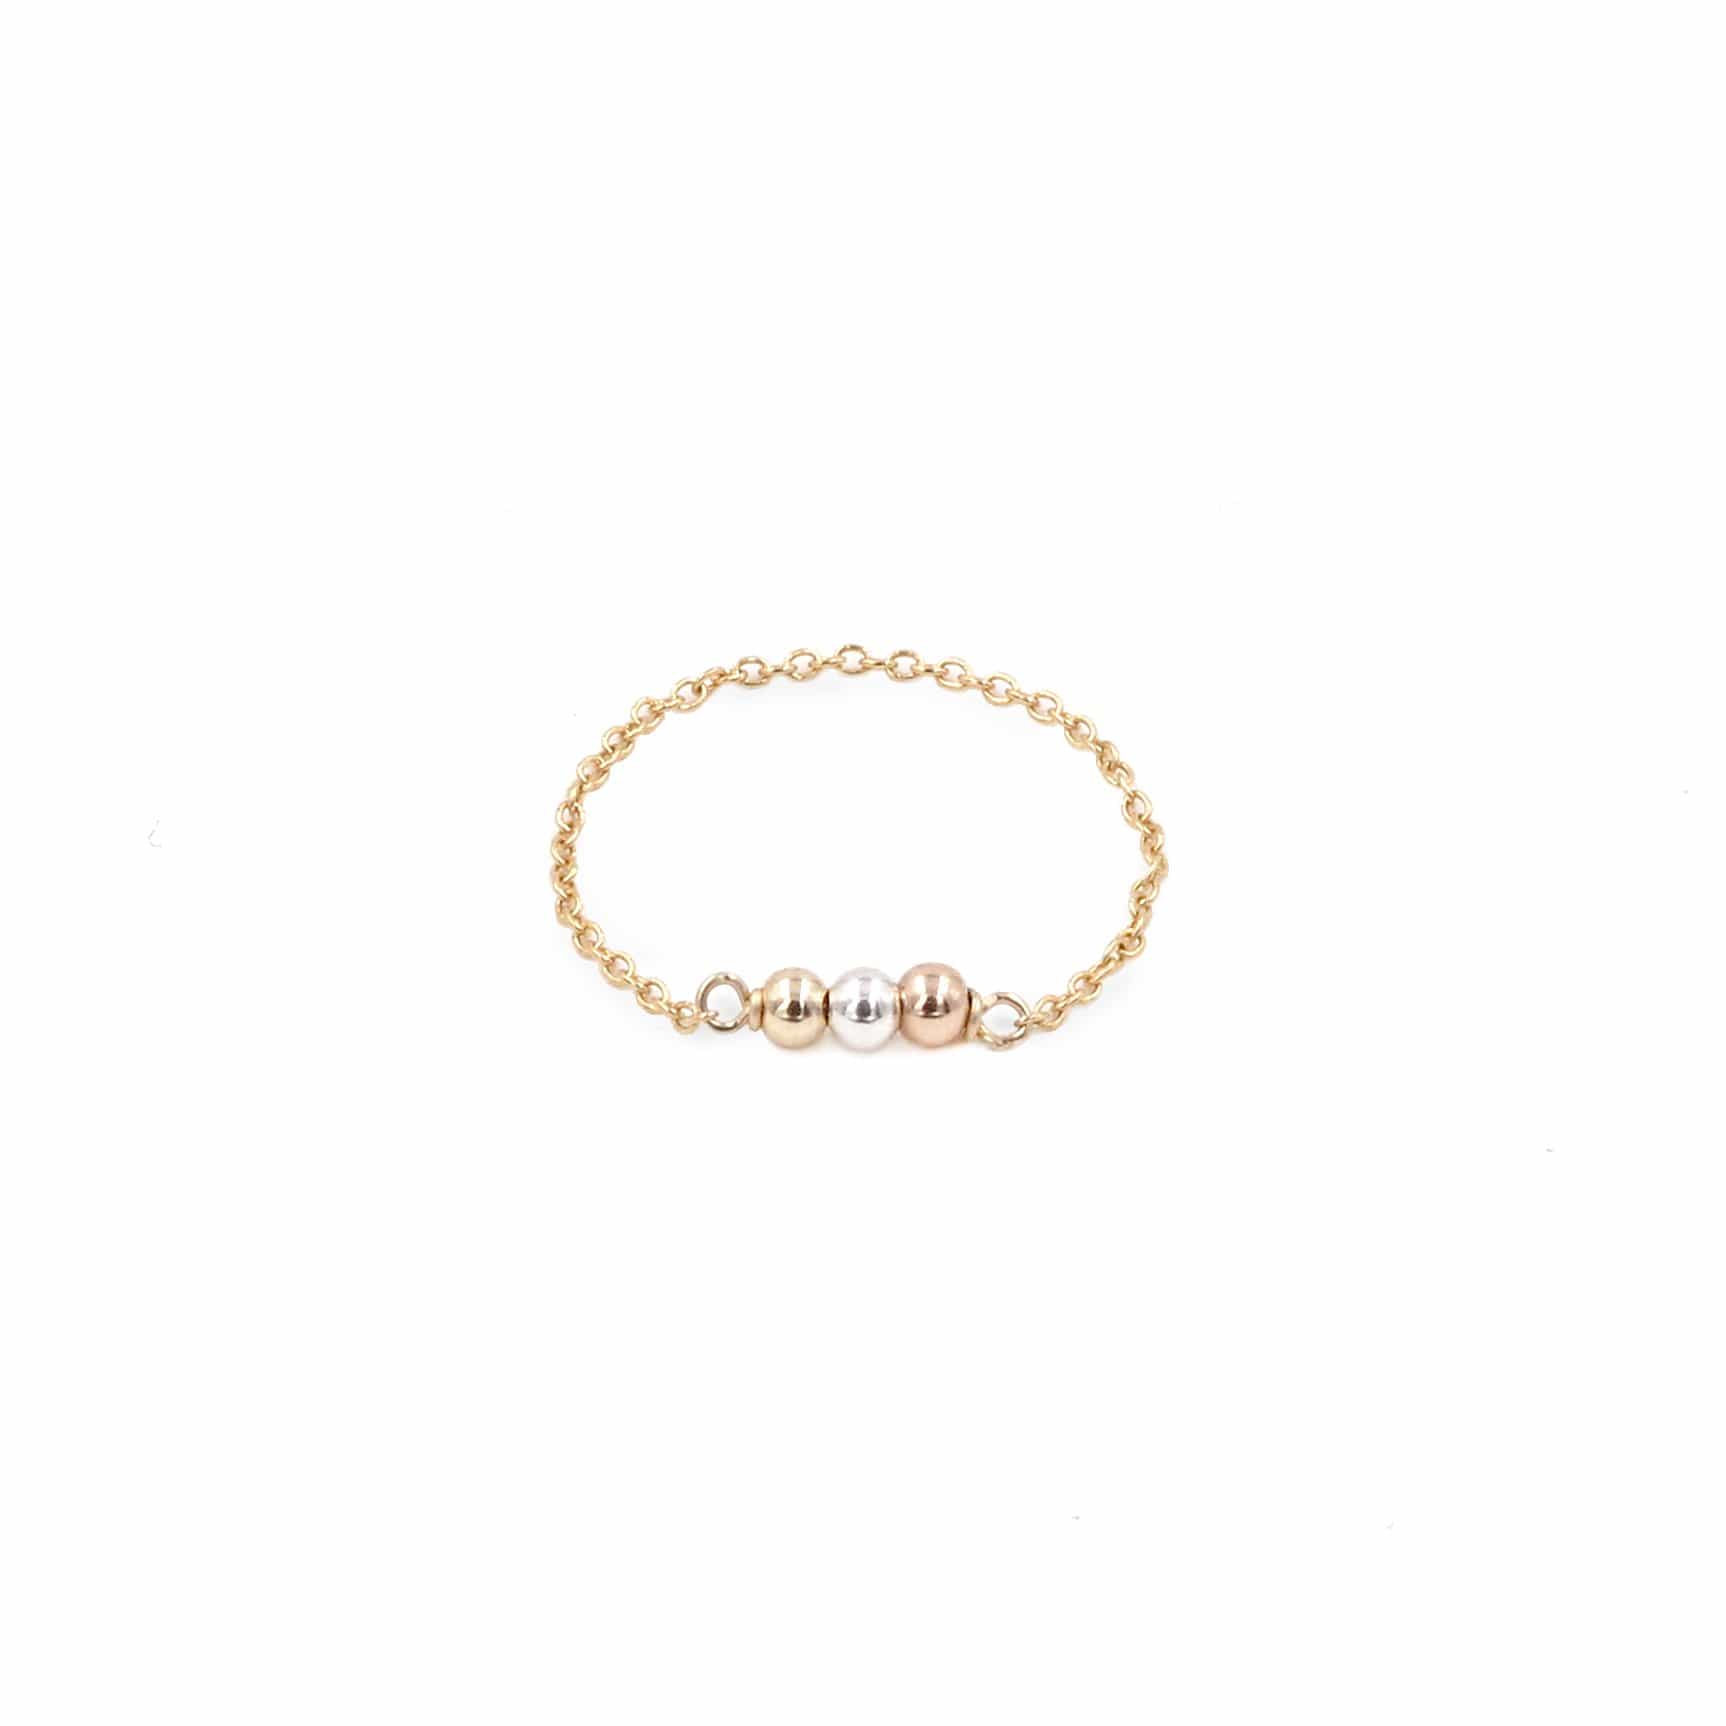 Maemae Jewelry | Just Breathe Ring | Chain Rings | Tri-Tone 8.5 / 14K Gold Filled